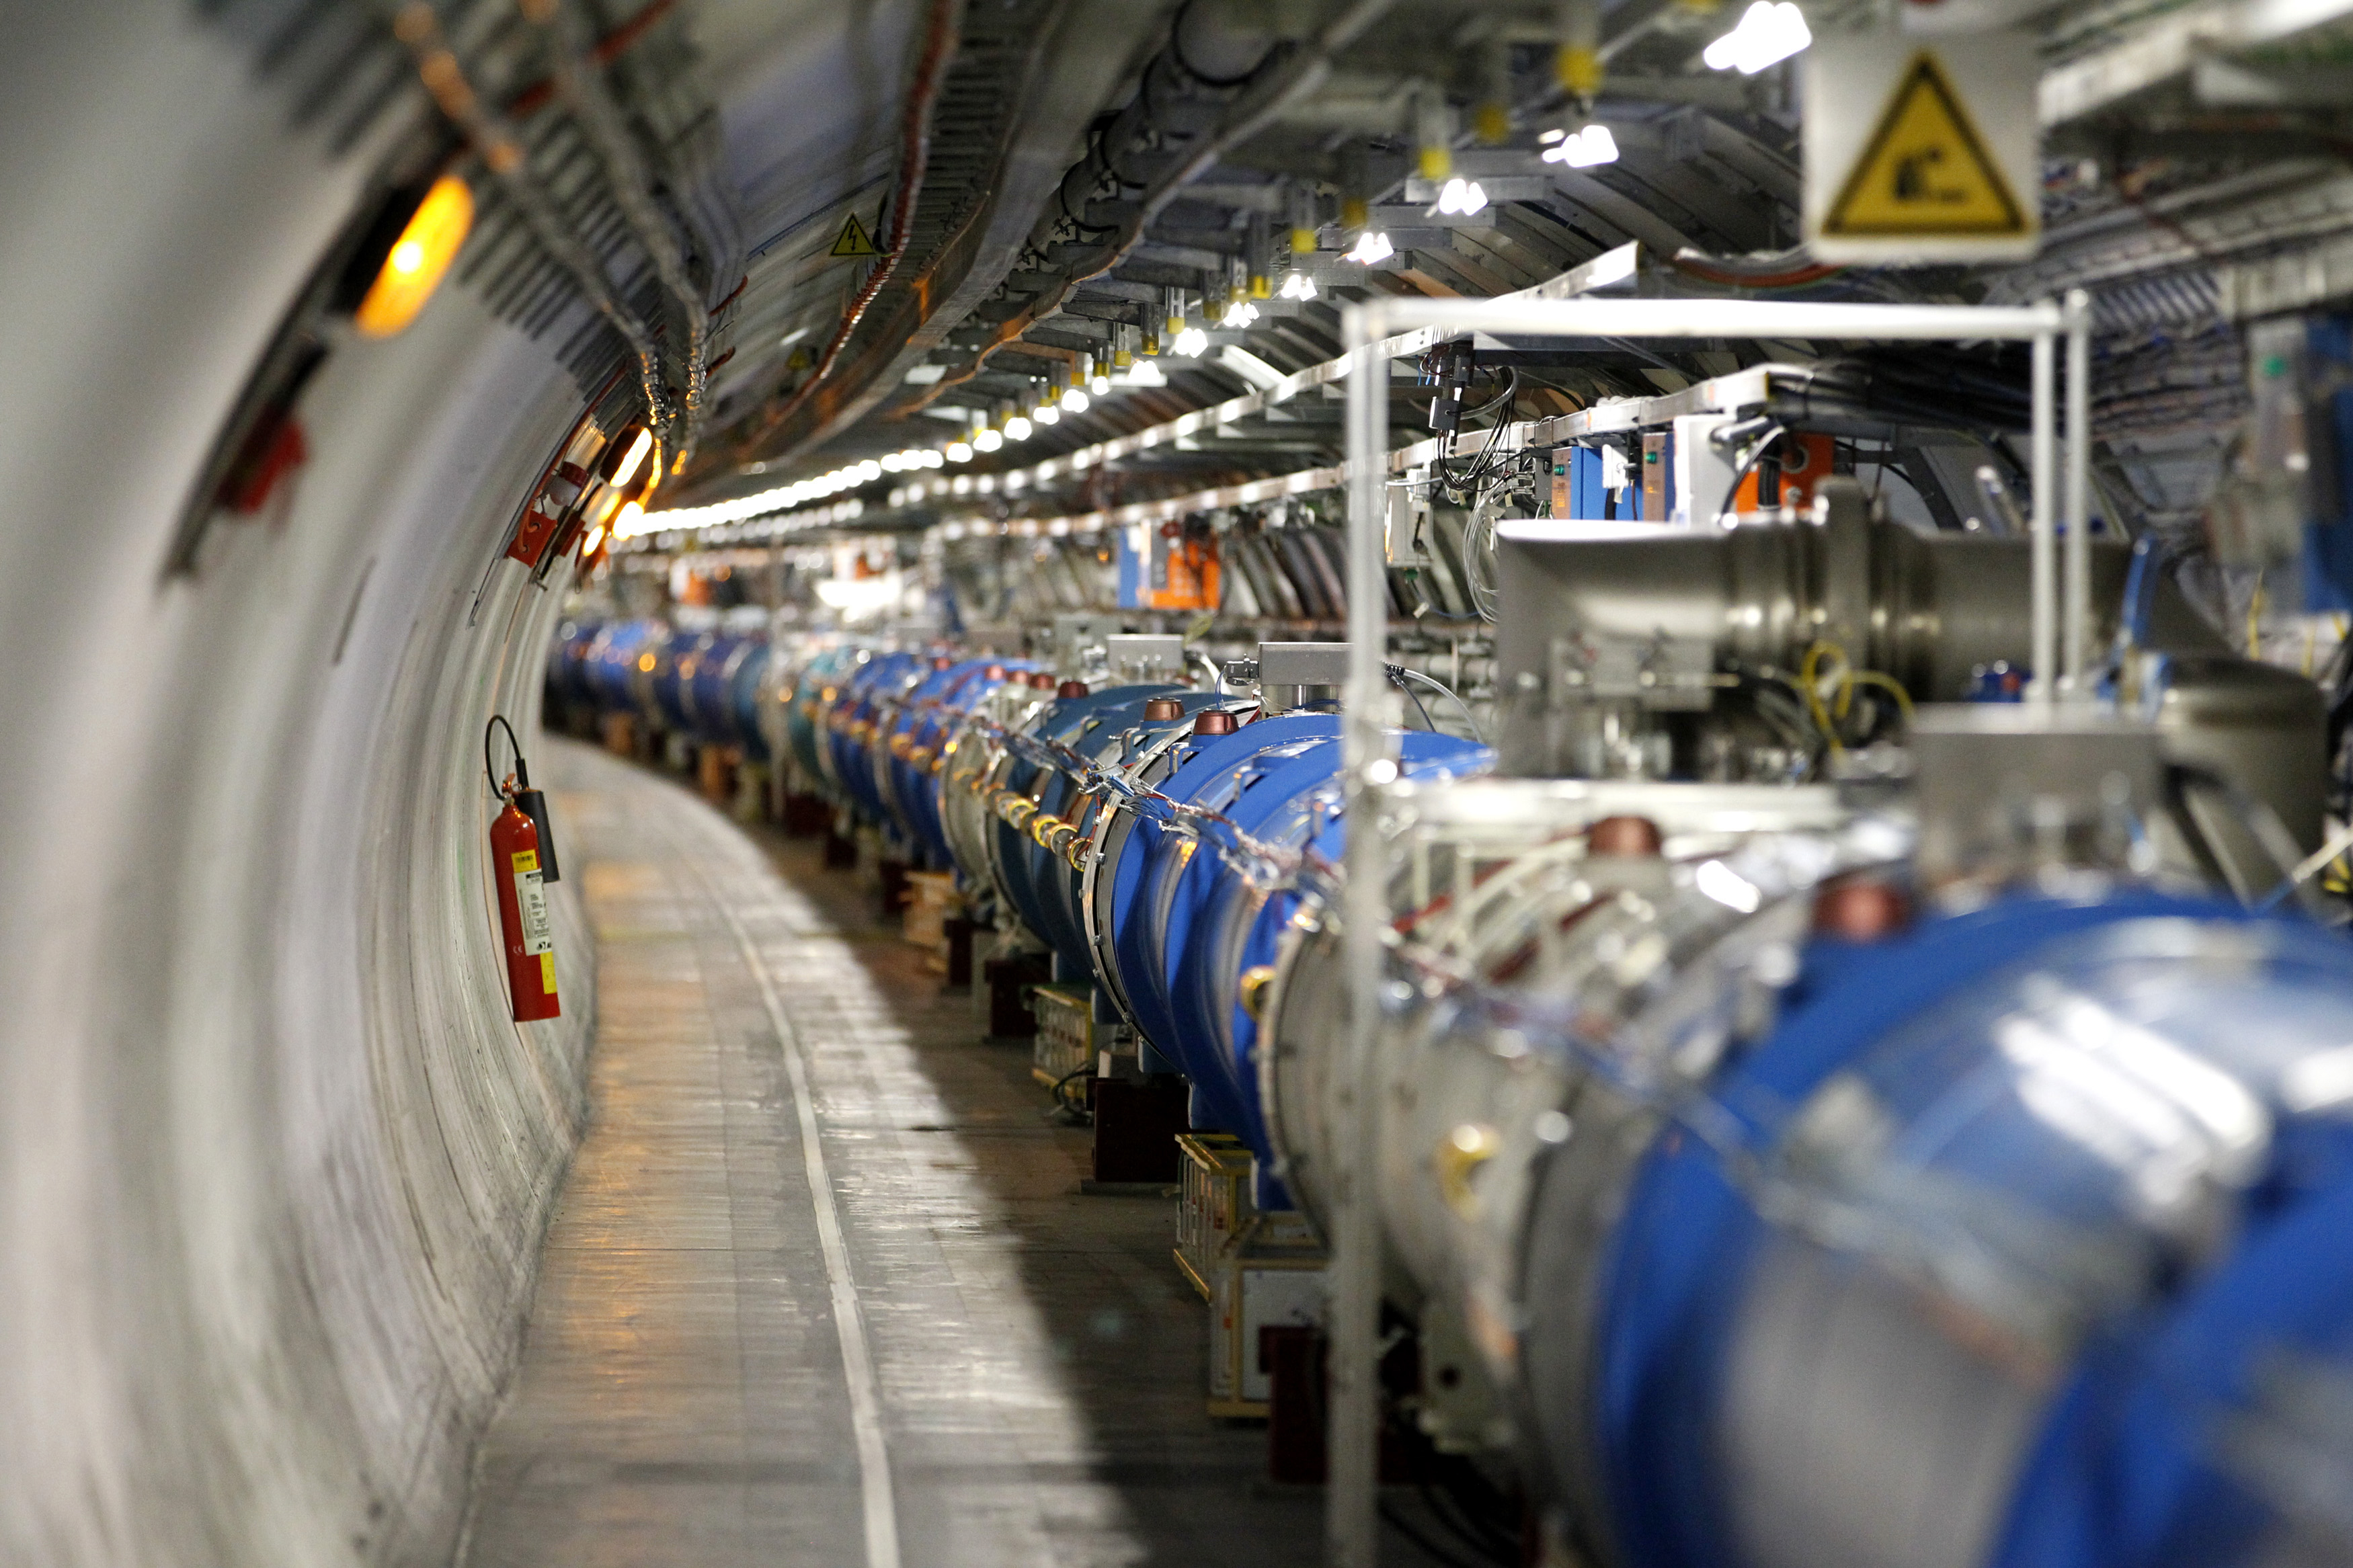 HQ Large Hadron Collider Wallpapers | File 1858.06Kb